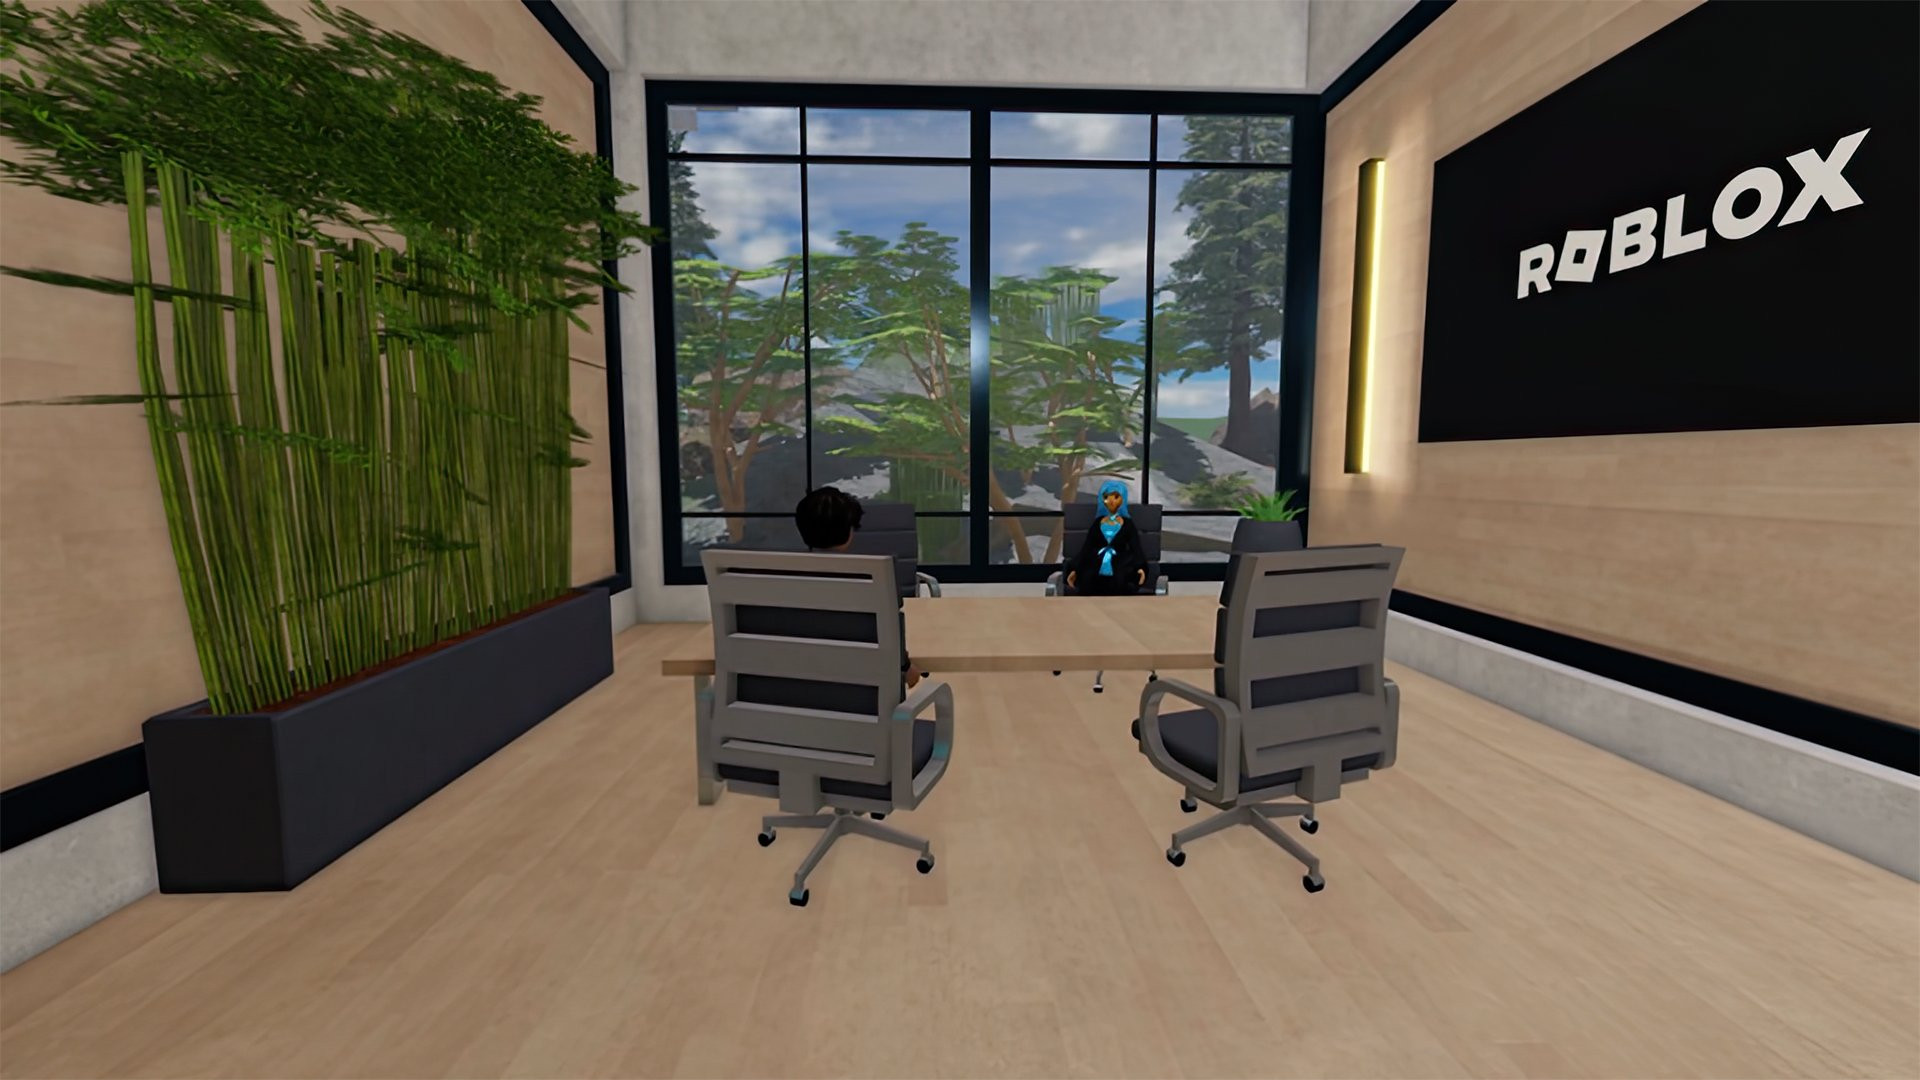 Roblox Career Center: A New Way to Interview Candidates | Gametides